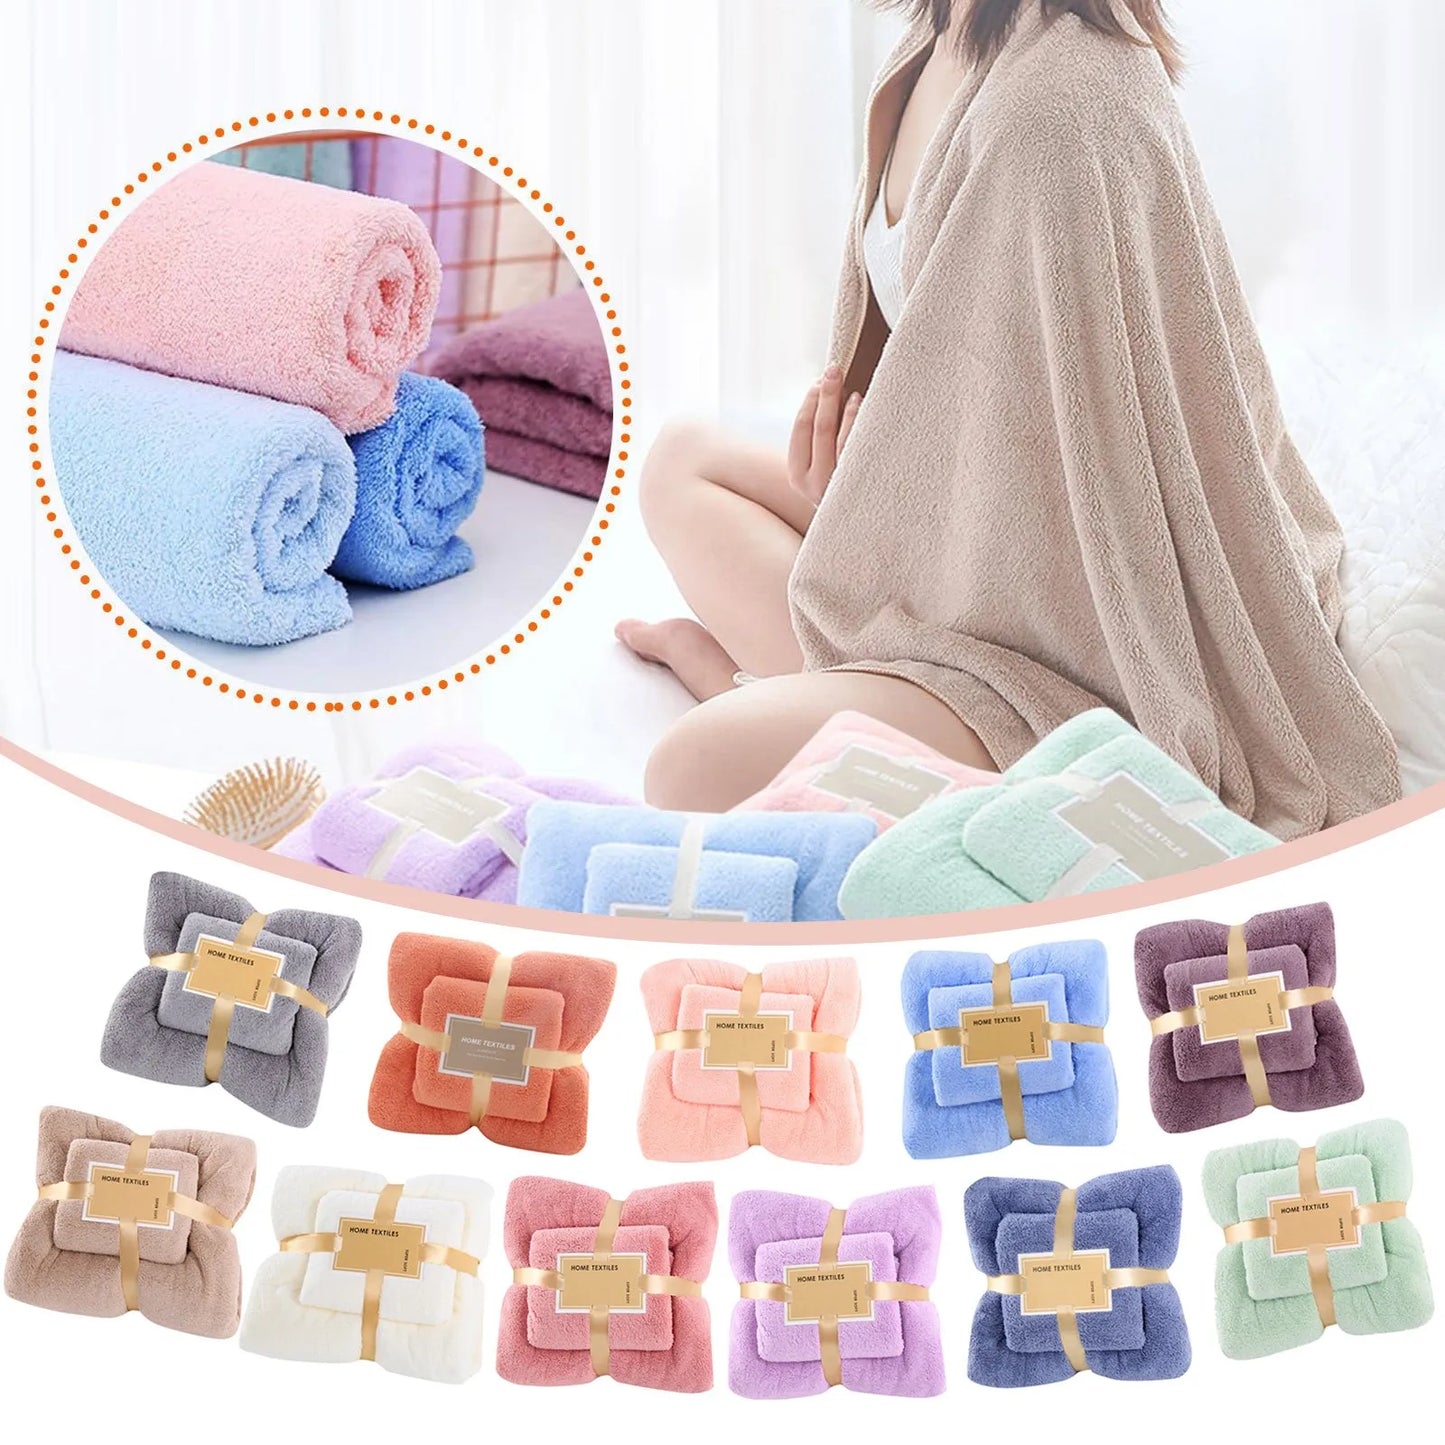 Mother-in-law Towel Set